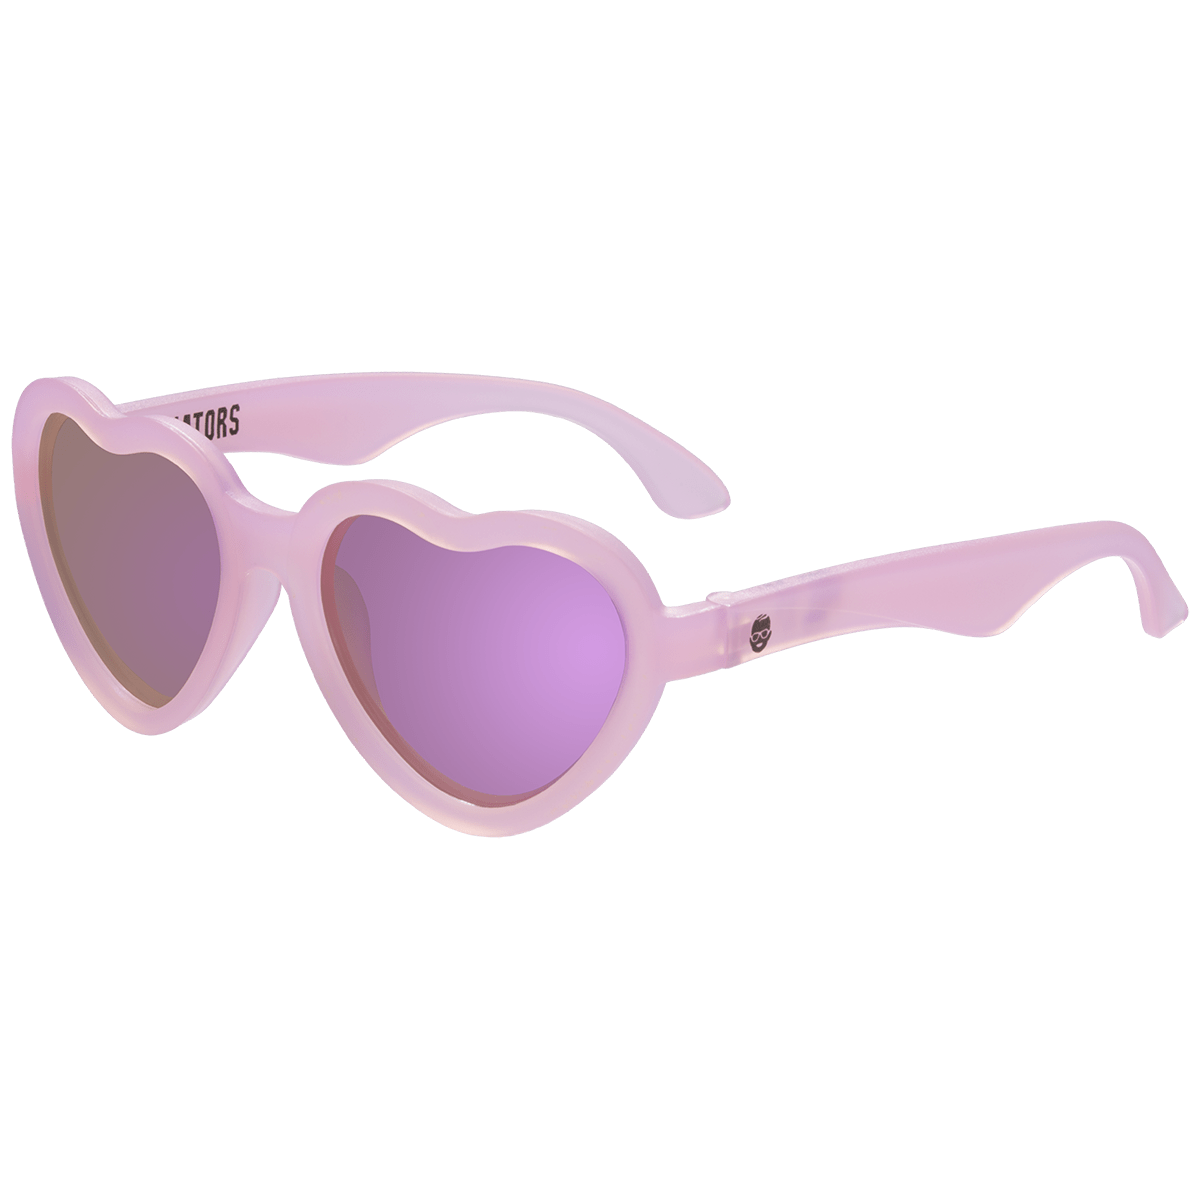 "The Influencer" Sunglasses, Pink